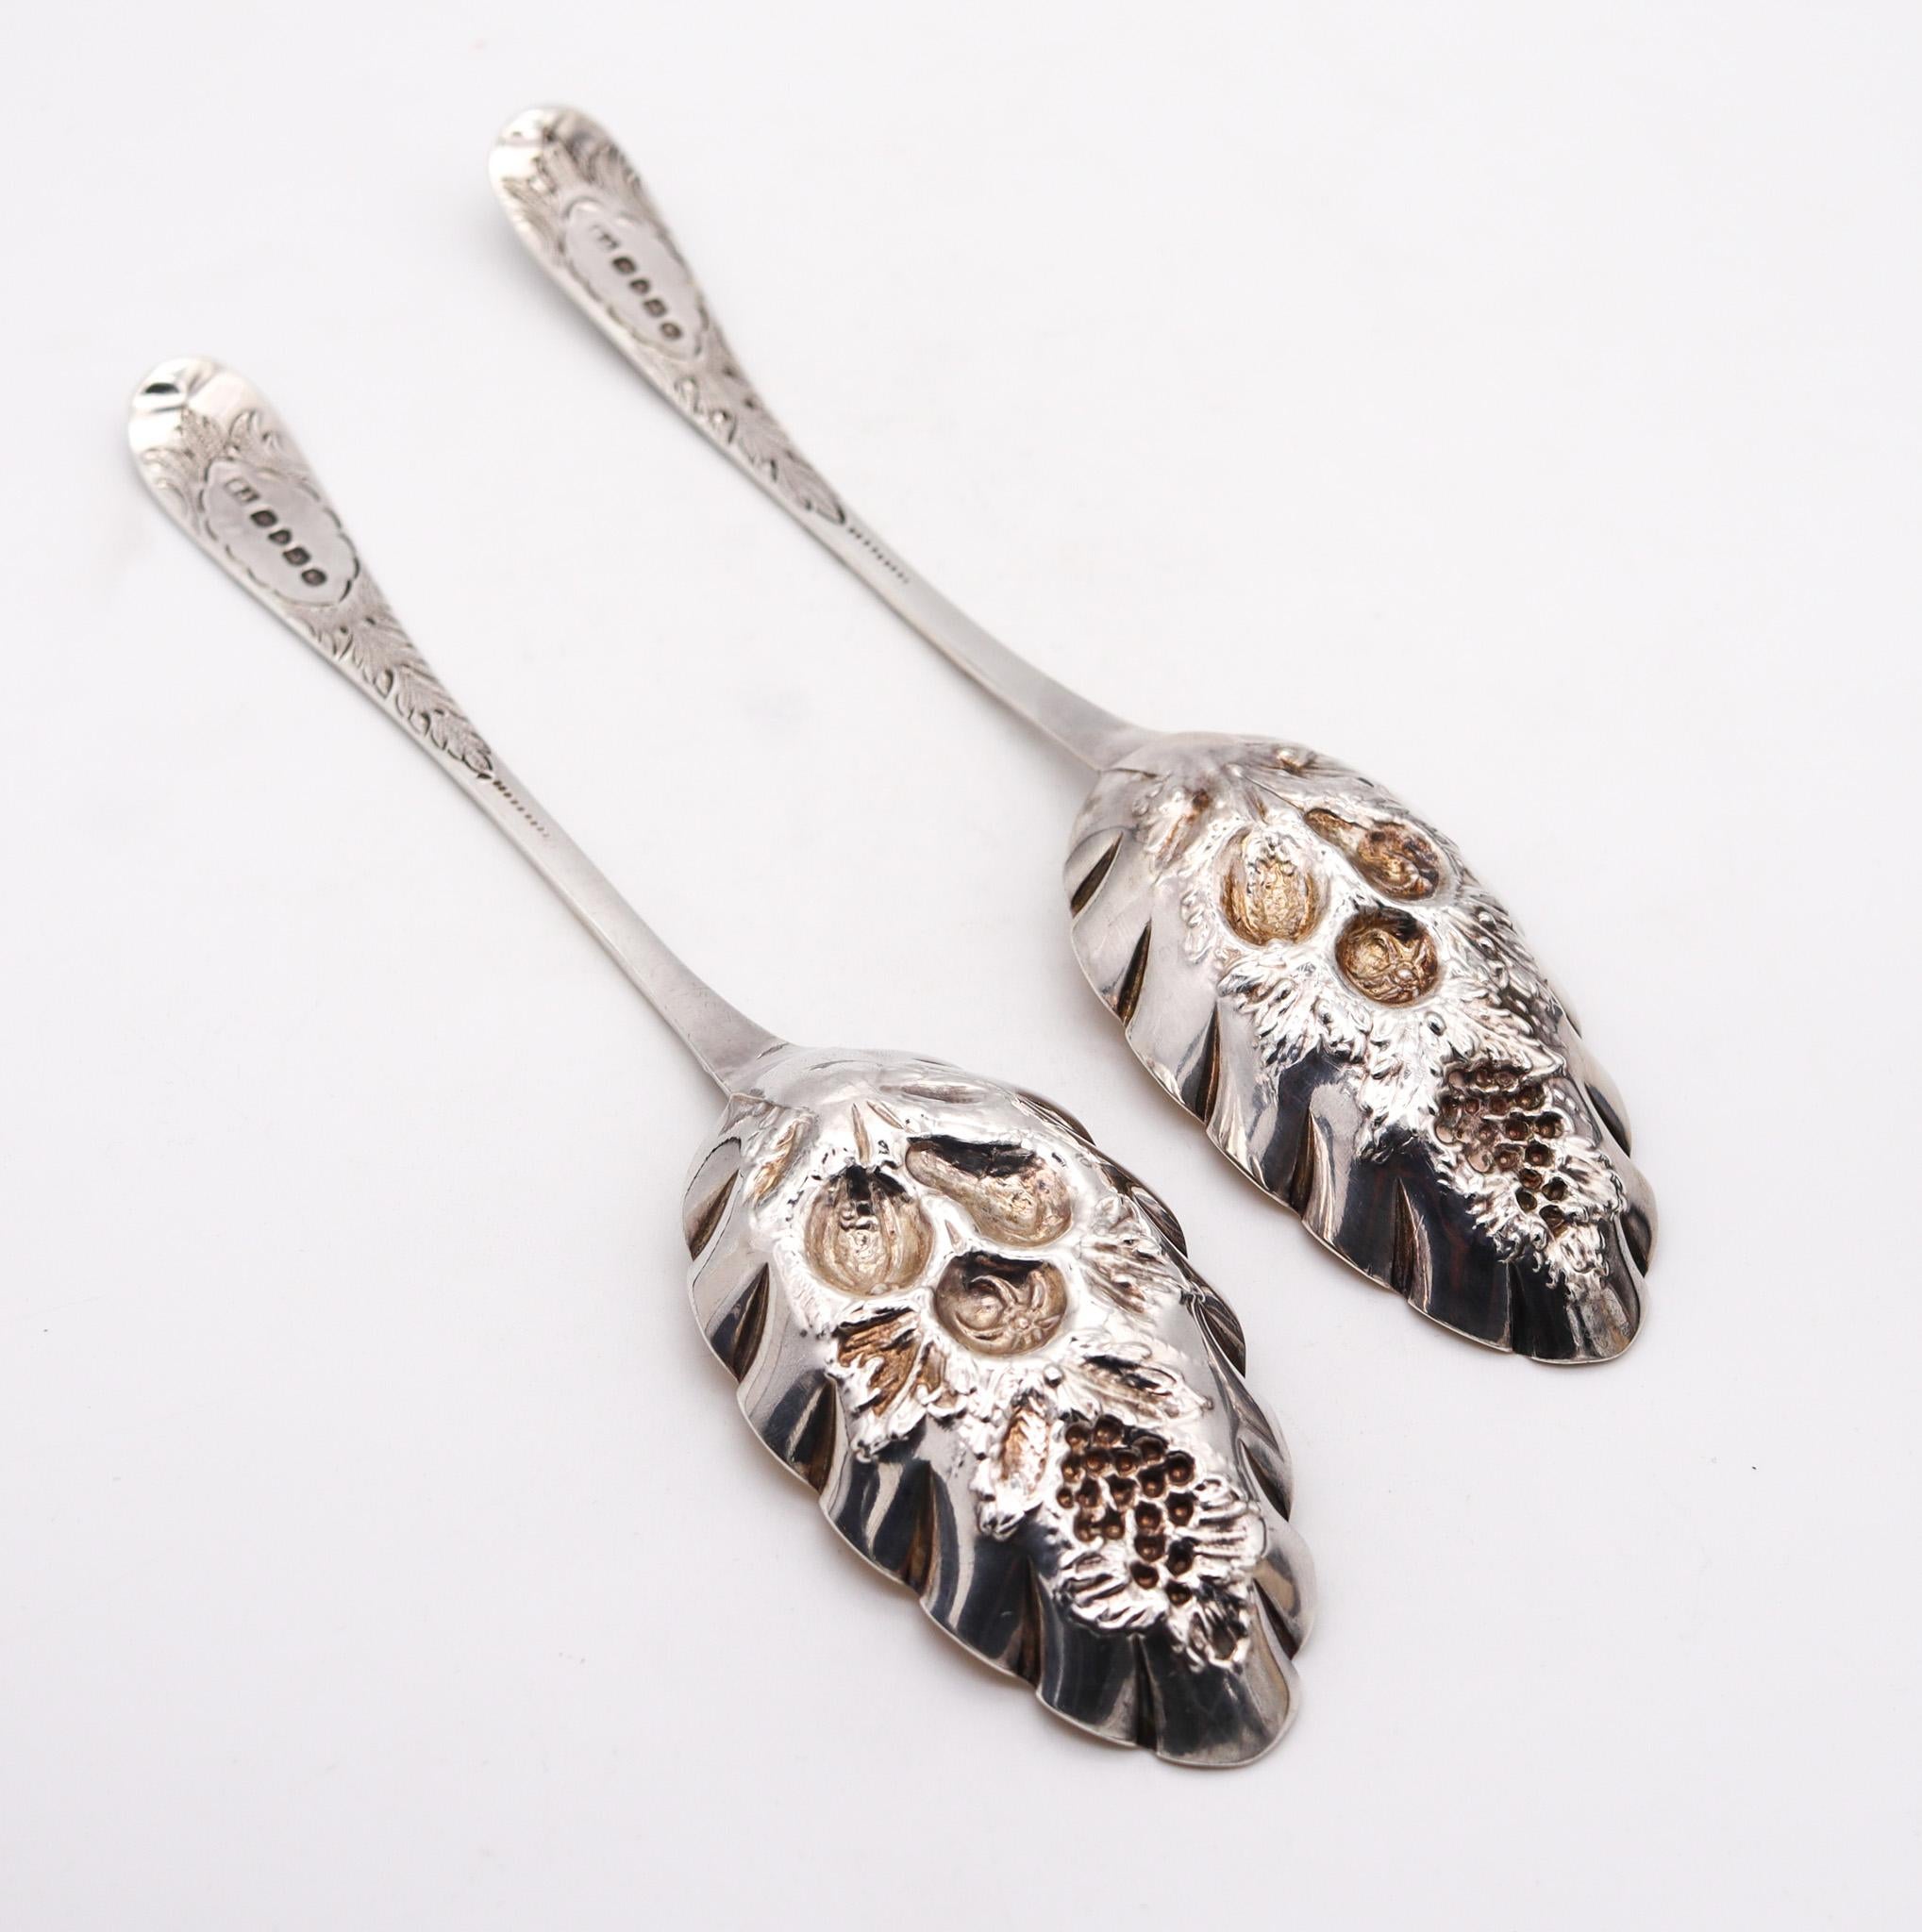 Thomas Barker 1825 London Georgian Pair of Fruit Spoons in Gilded .925 Sterling In Excellent Condition For Sale In Miami, FL